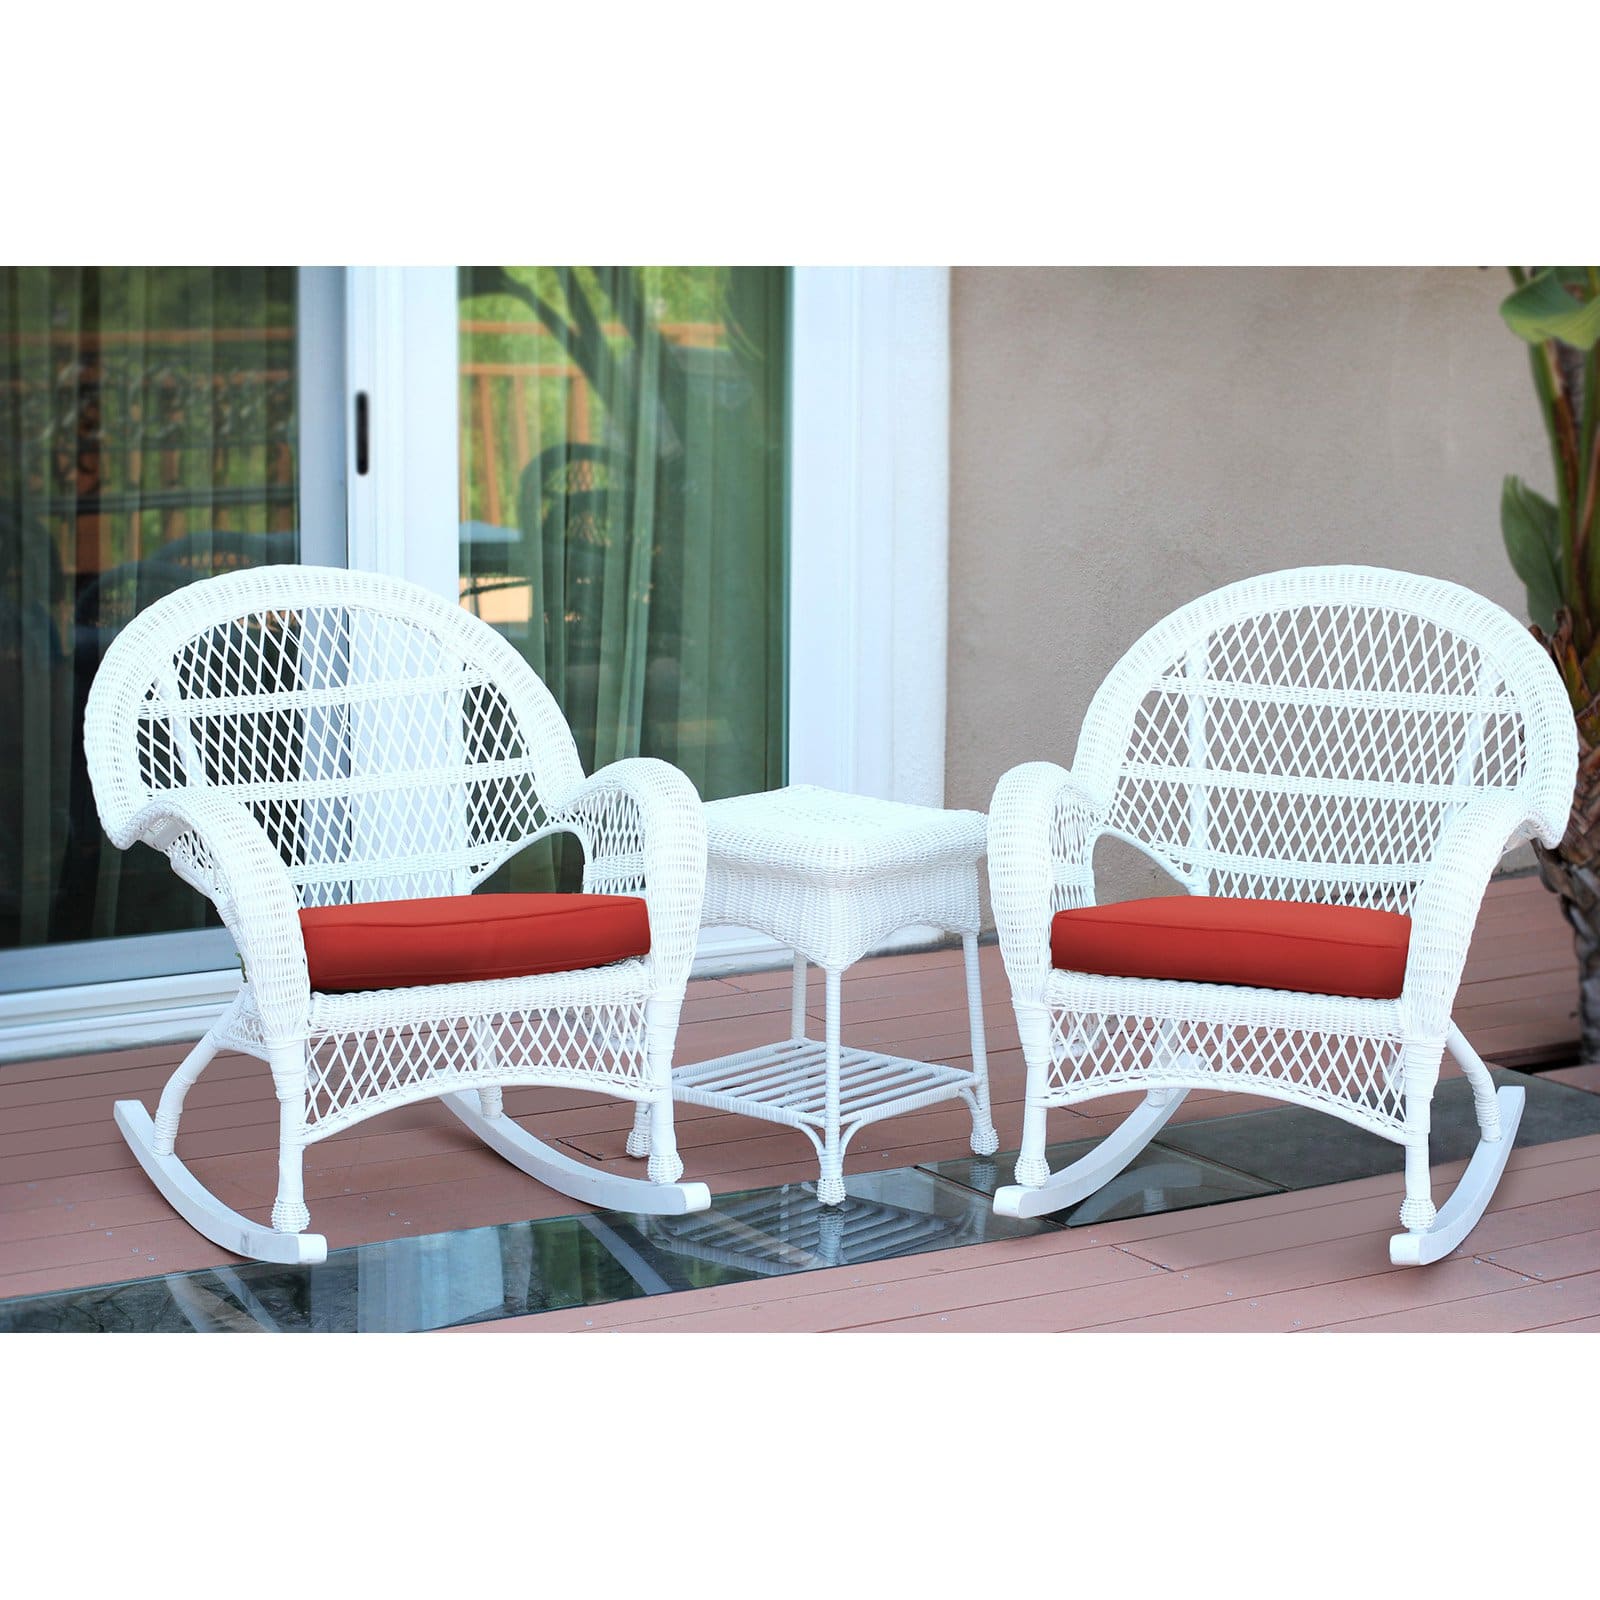 Jeco 3 Piece Wicker Conversation Set in Espresso with Red Cushions - image 2 of 11